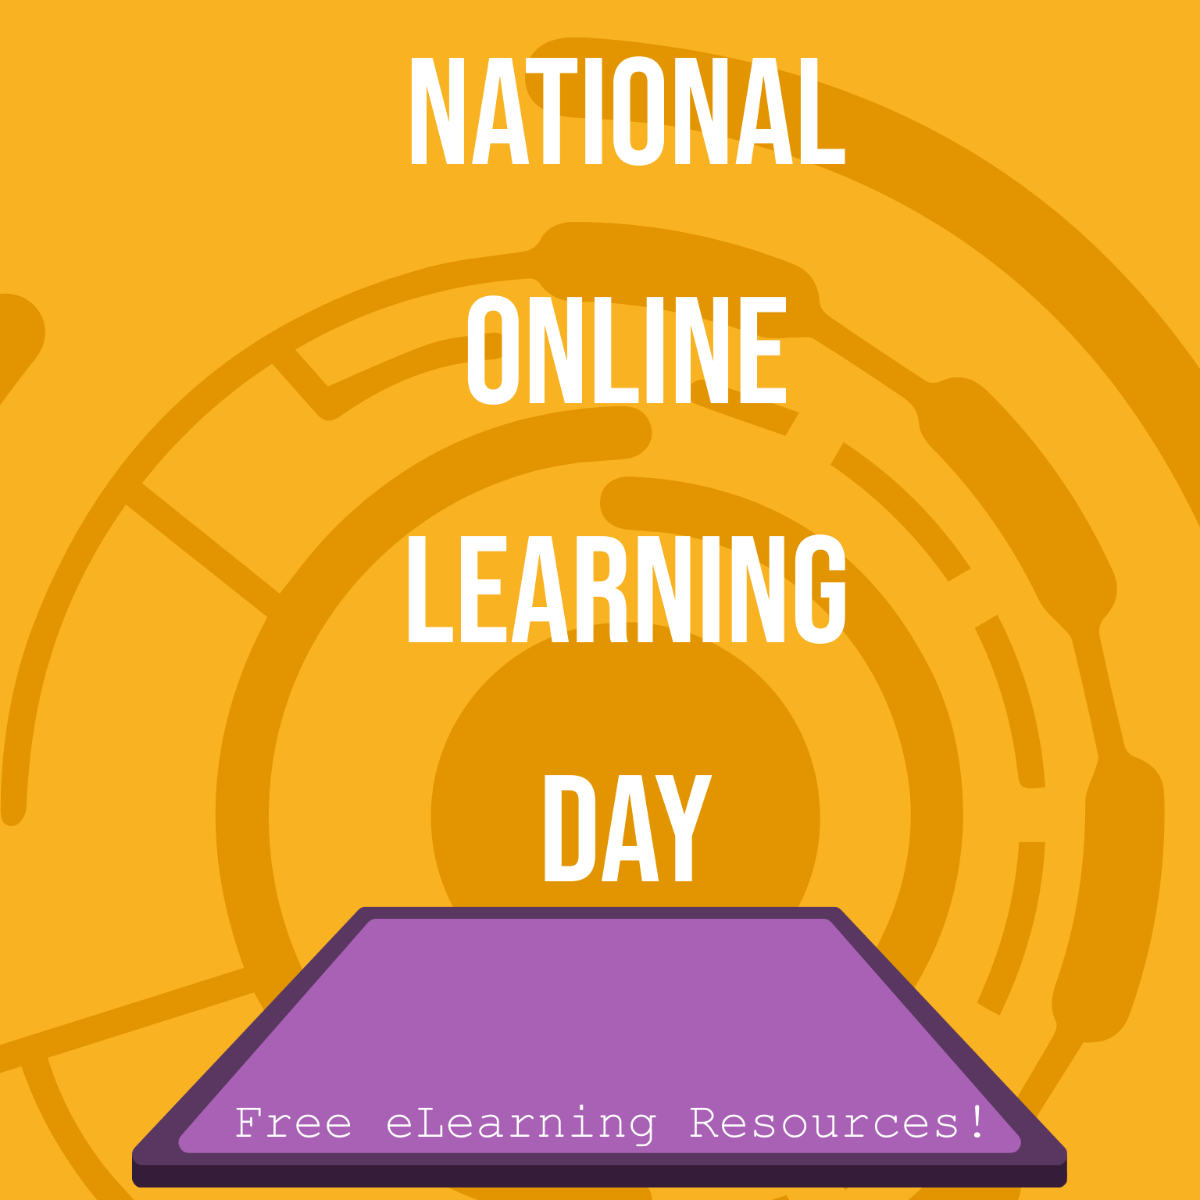 National Online Learning Day Flyer Vector Template